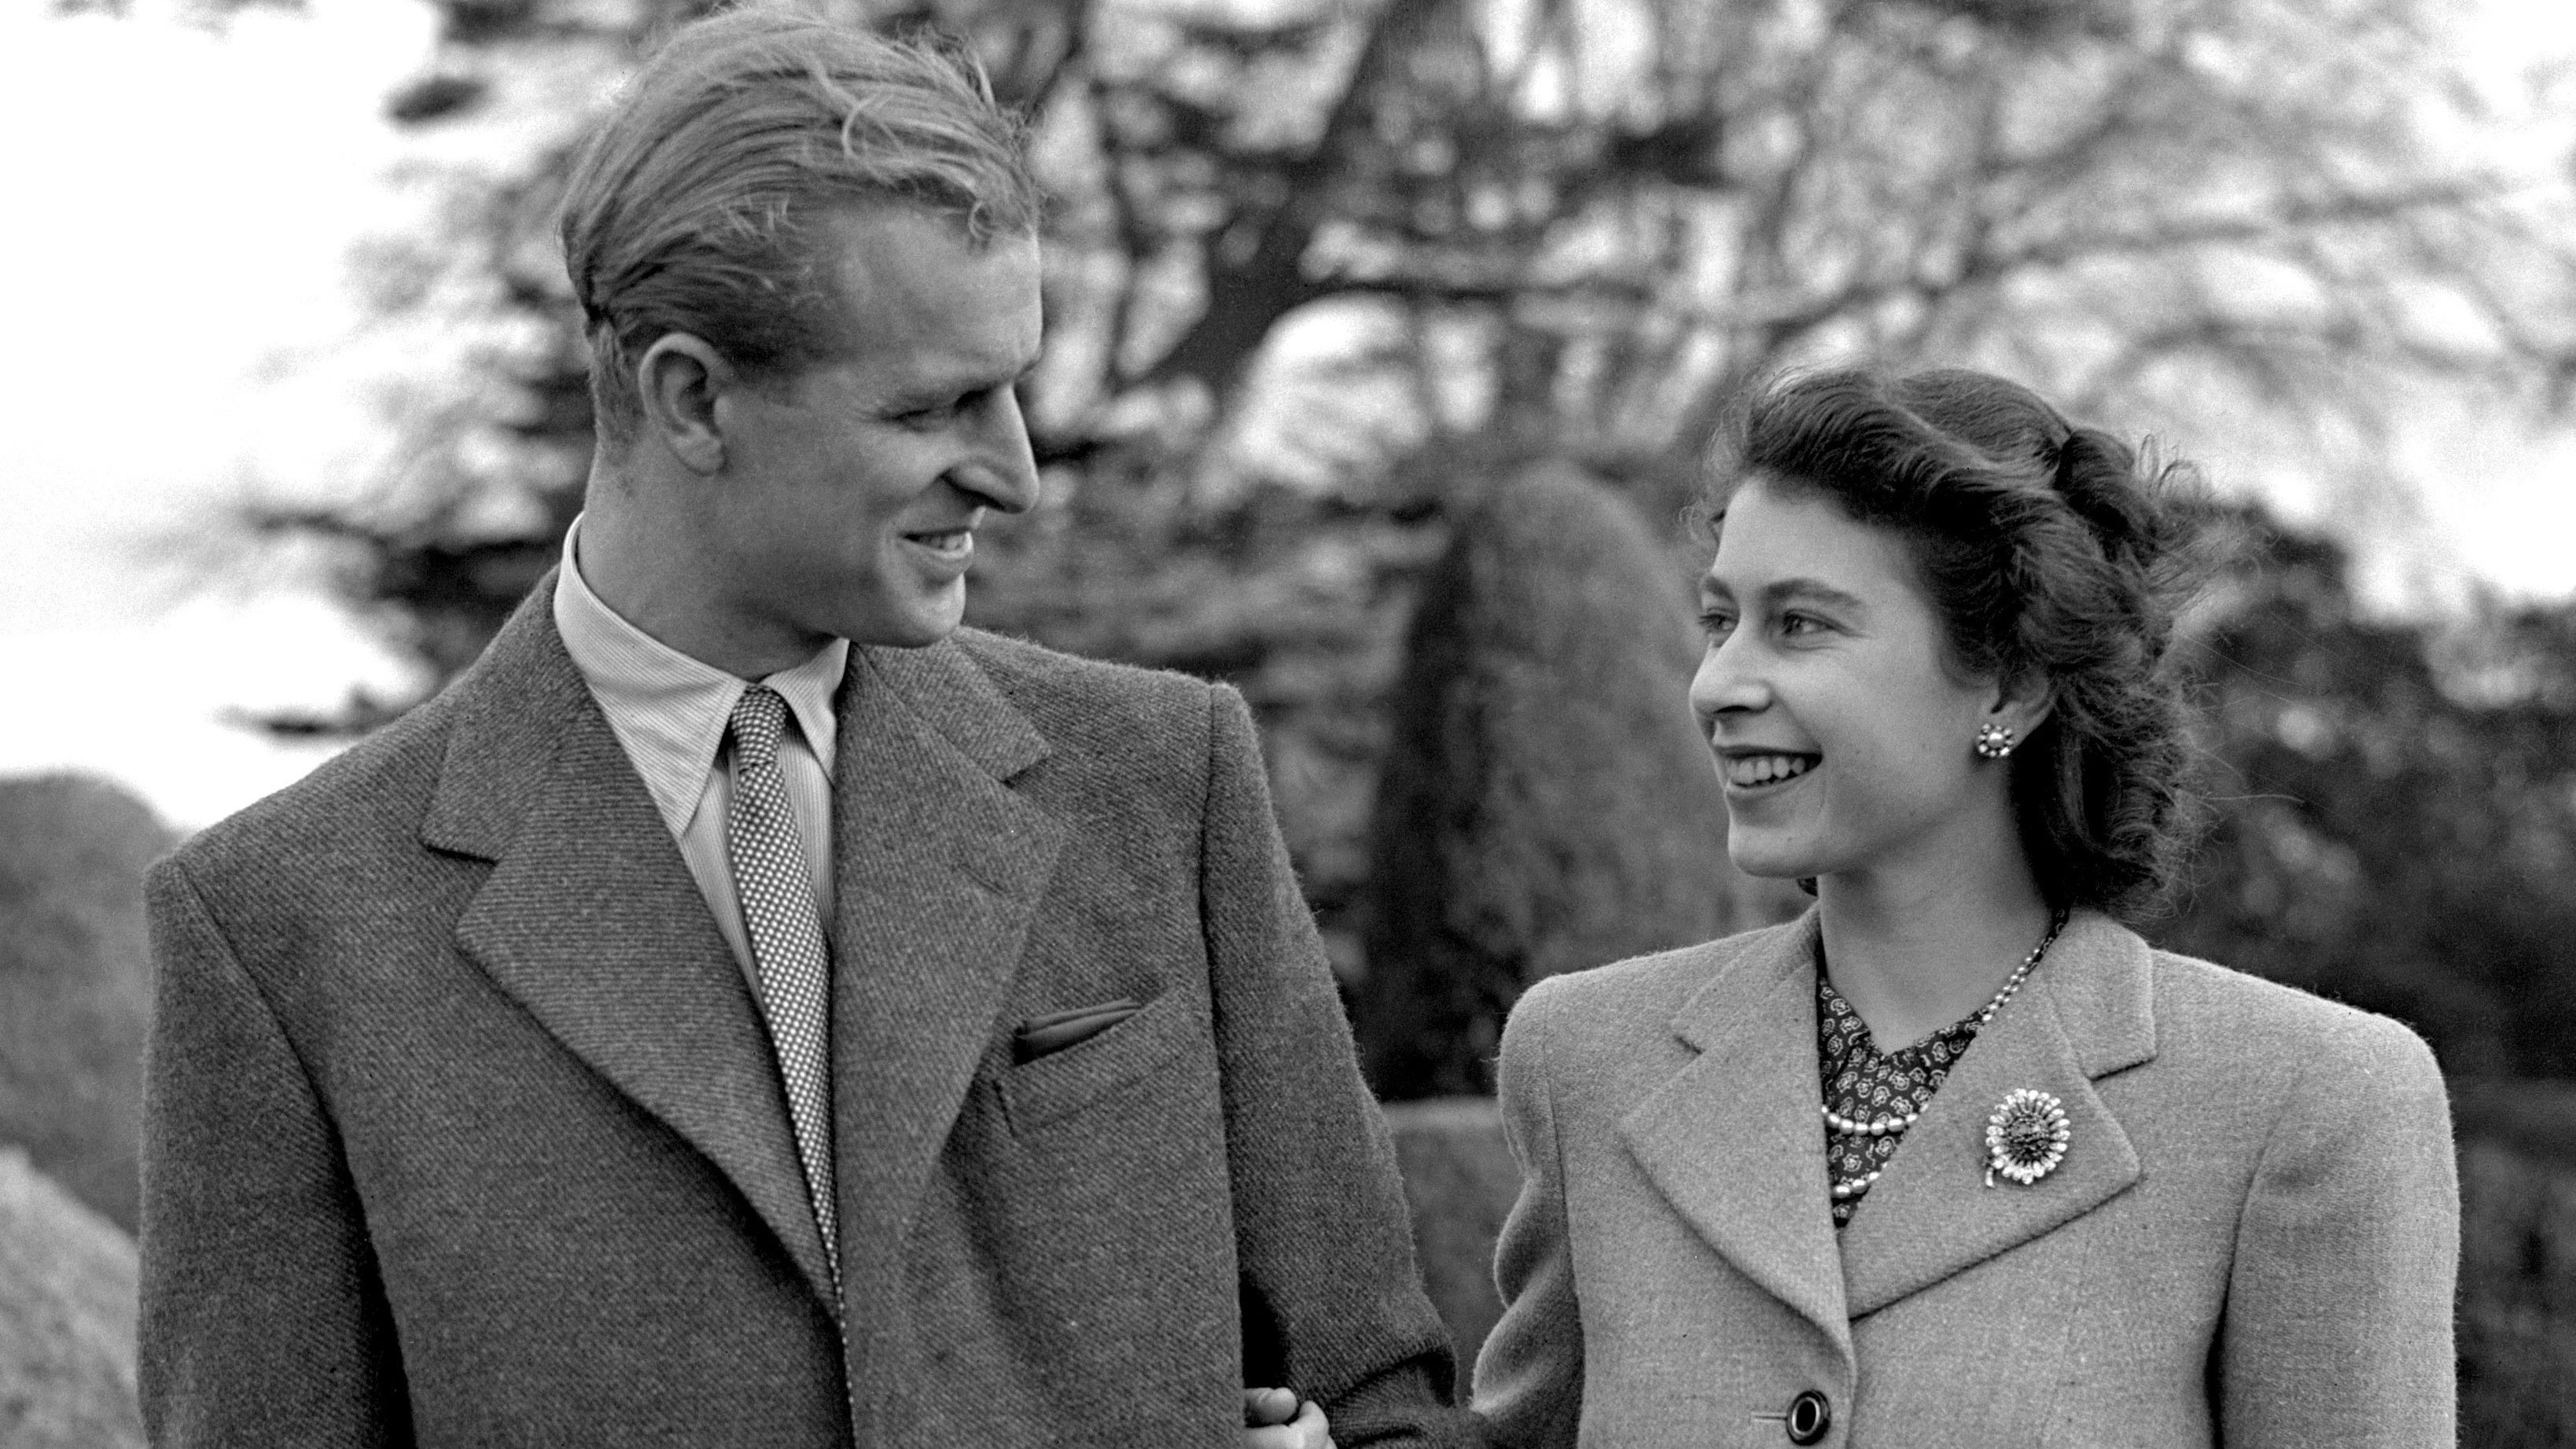 Princess Elizabeth in 1947 enjoying a stroll with her husband, the Duke of Edinburgh, at Broadlands, Hampshire, during their first public appearance since their wedding (PA)